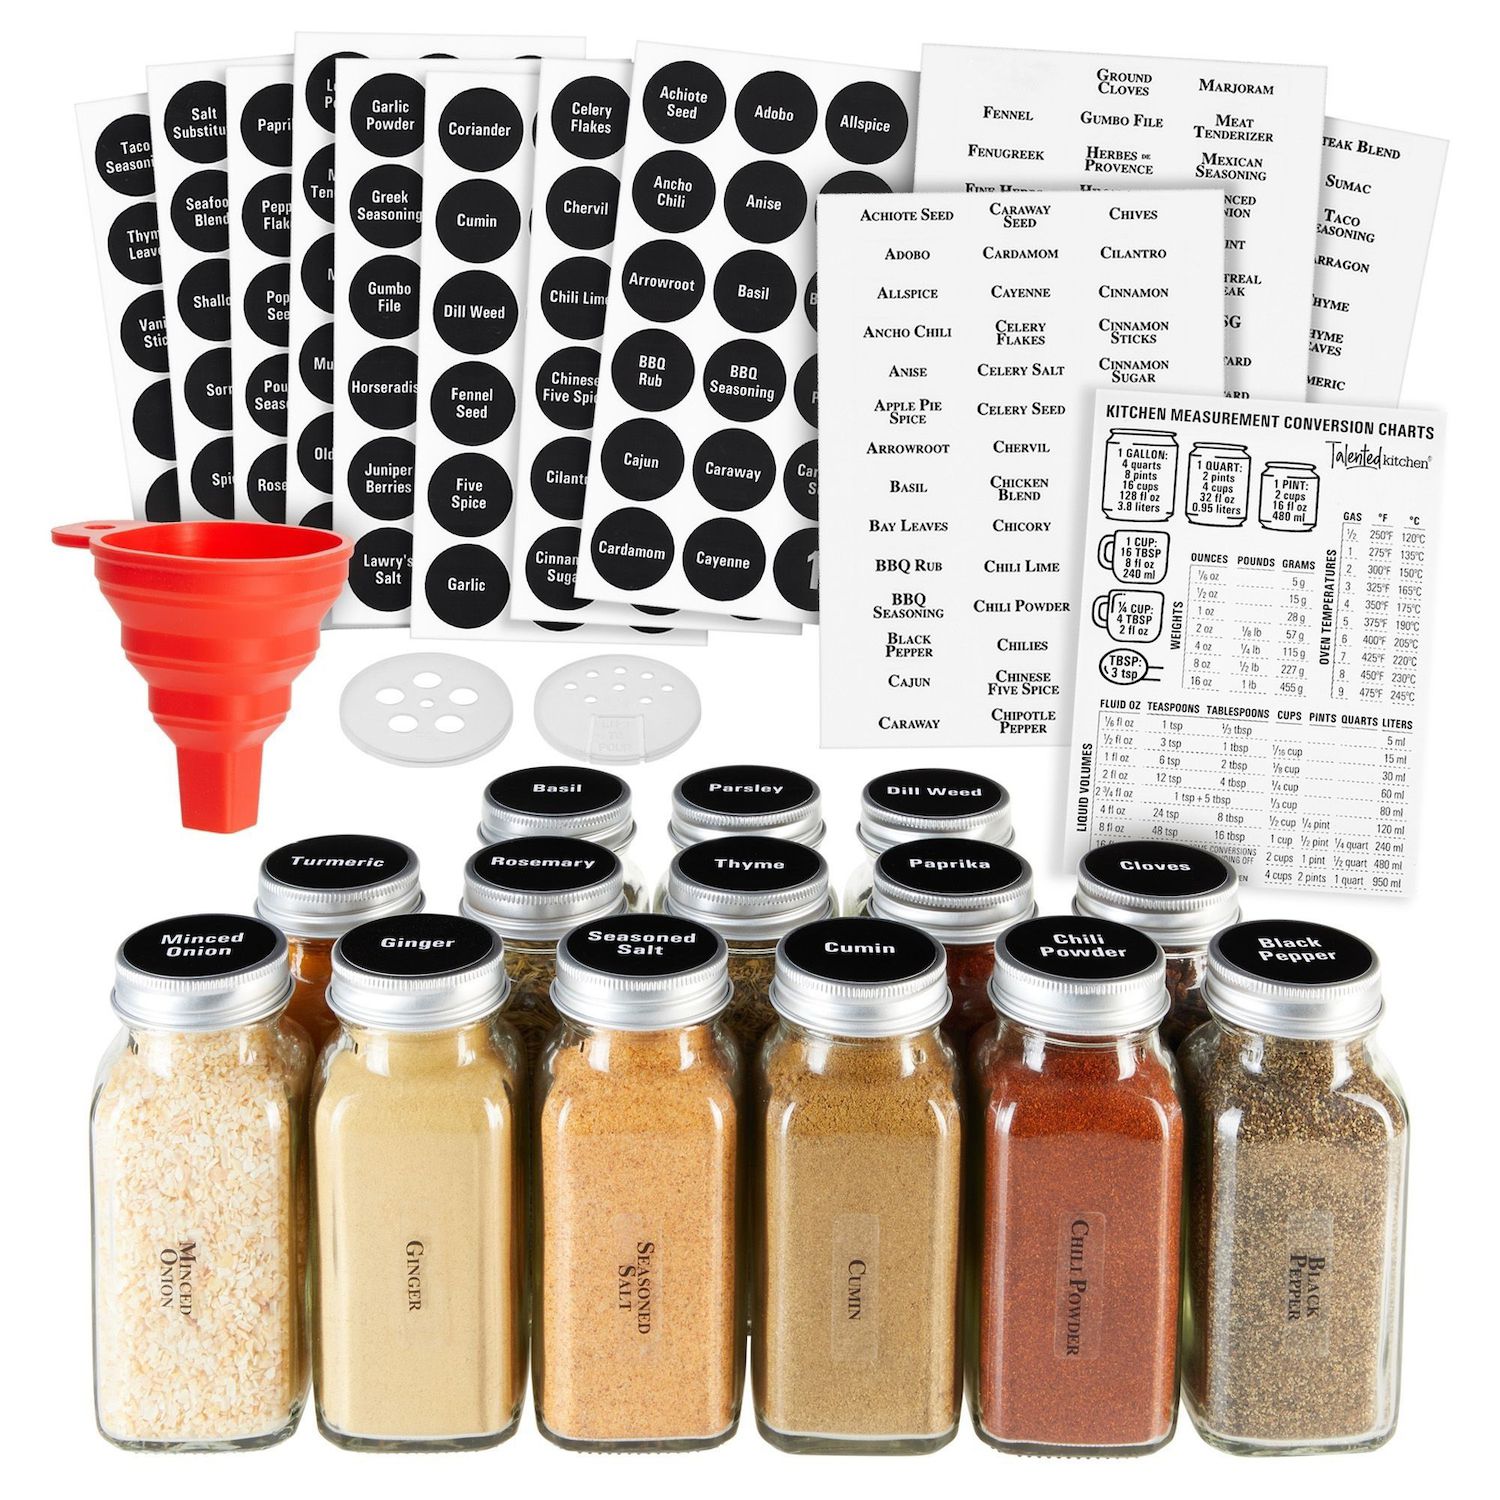 30 Glass Spice Jars 6 oz Empty Square Spice Bottles with Spice Labels,  Chalk Marker and Funnel Complete Set. 30 Spice Containers with Airtight  Cap